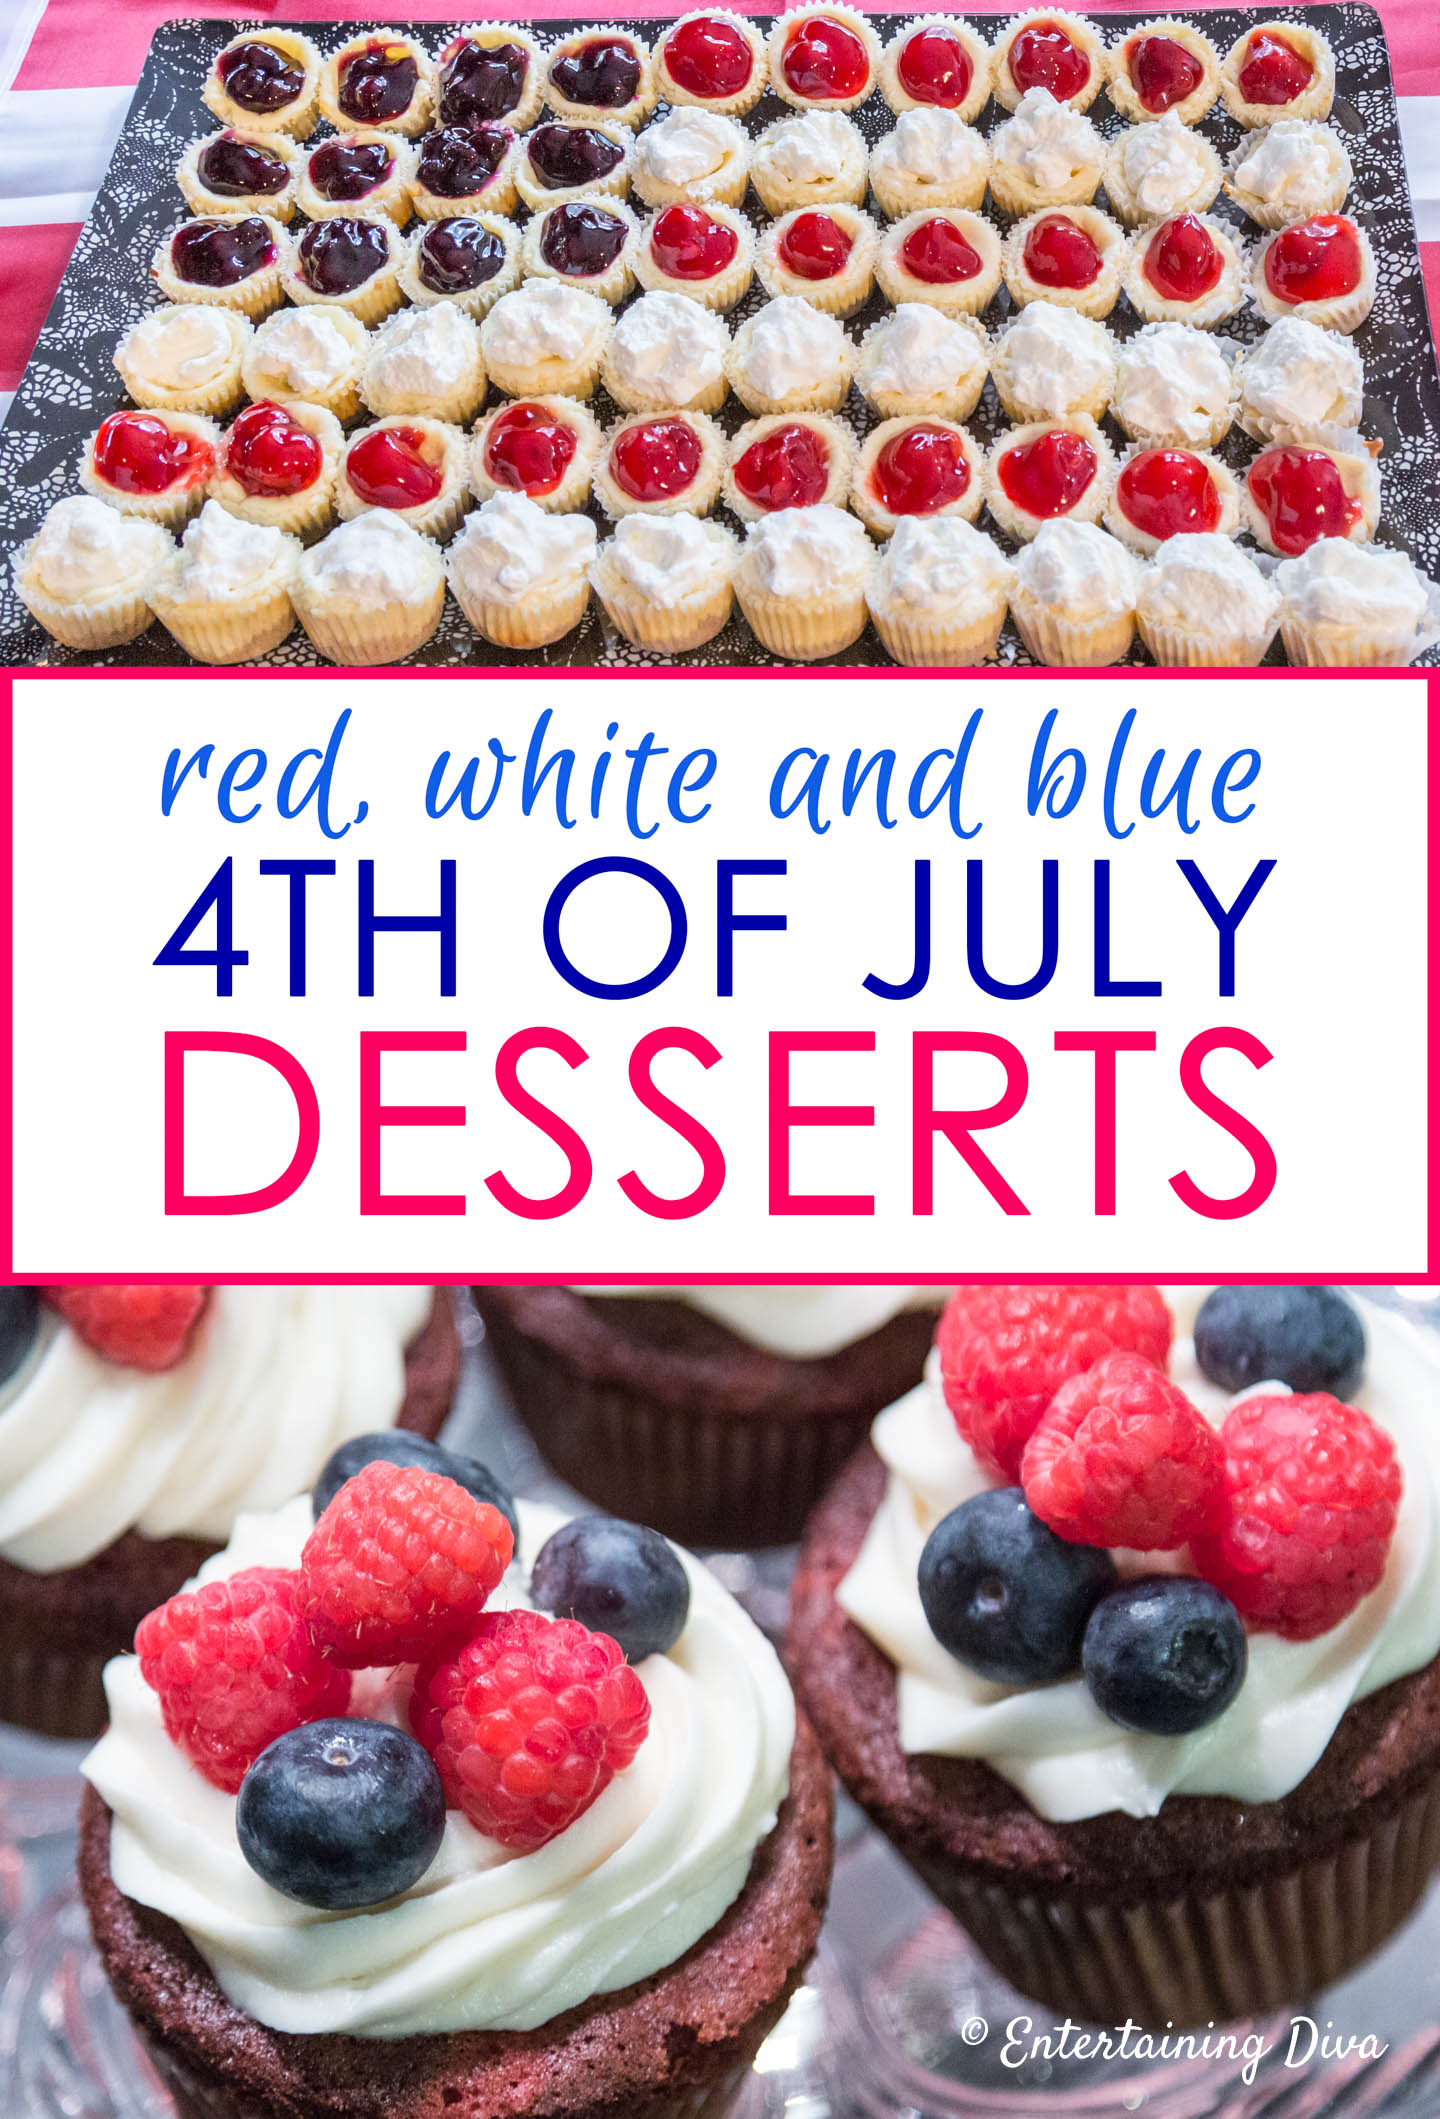 Red, white and blue 4th of July desserts